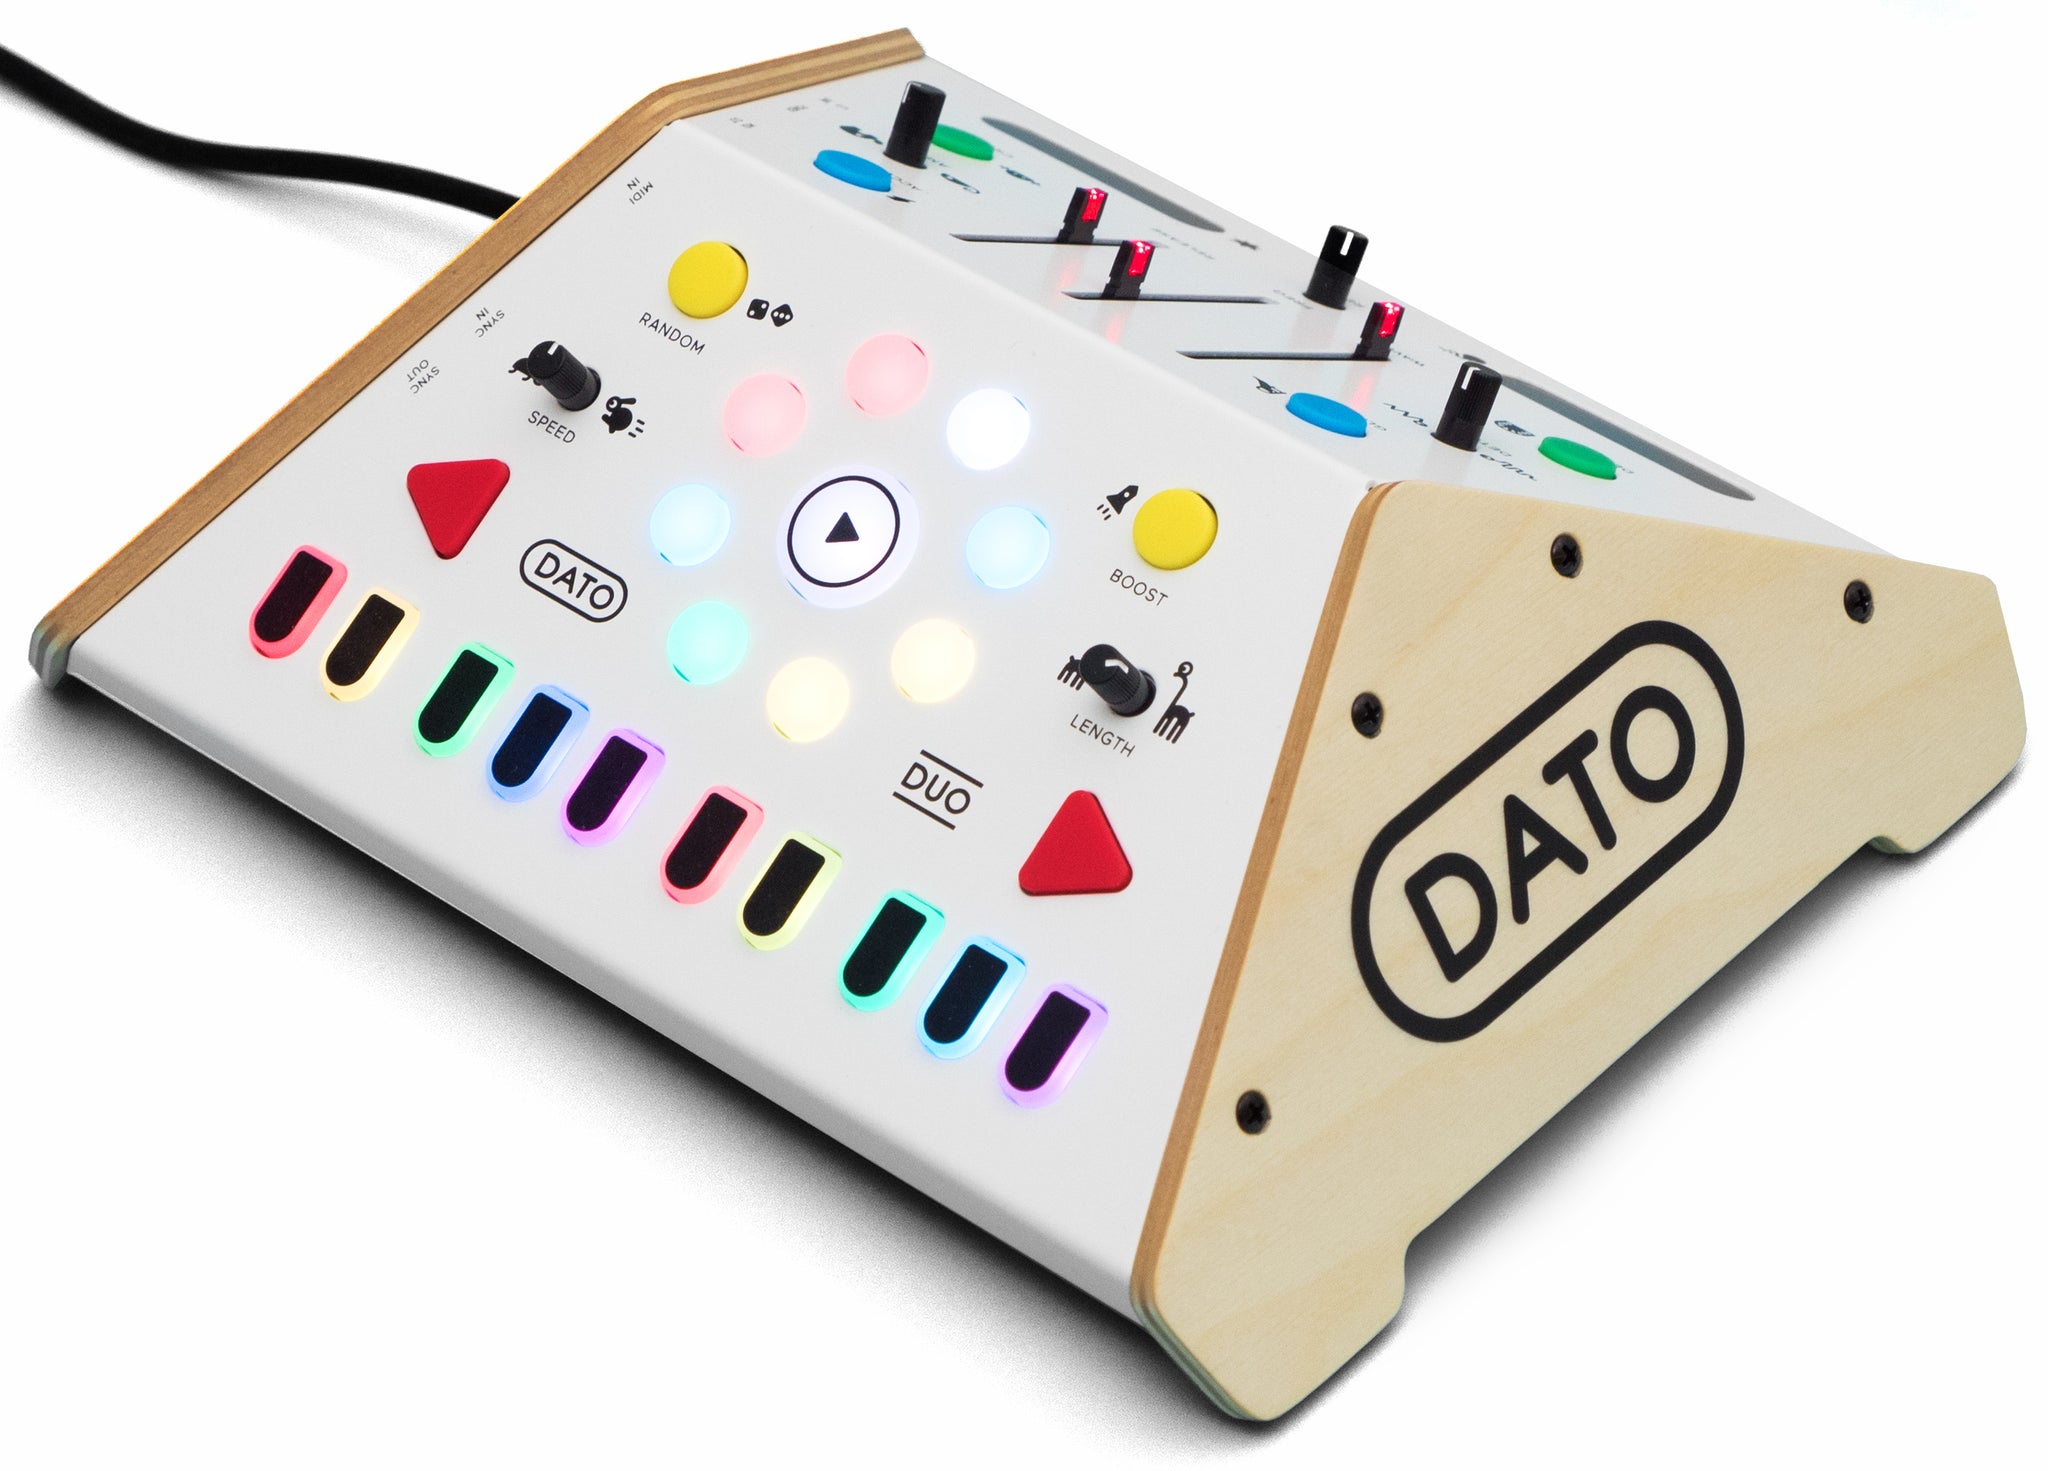 Dato DUO — the synth for two